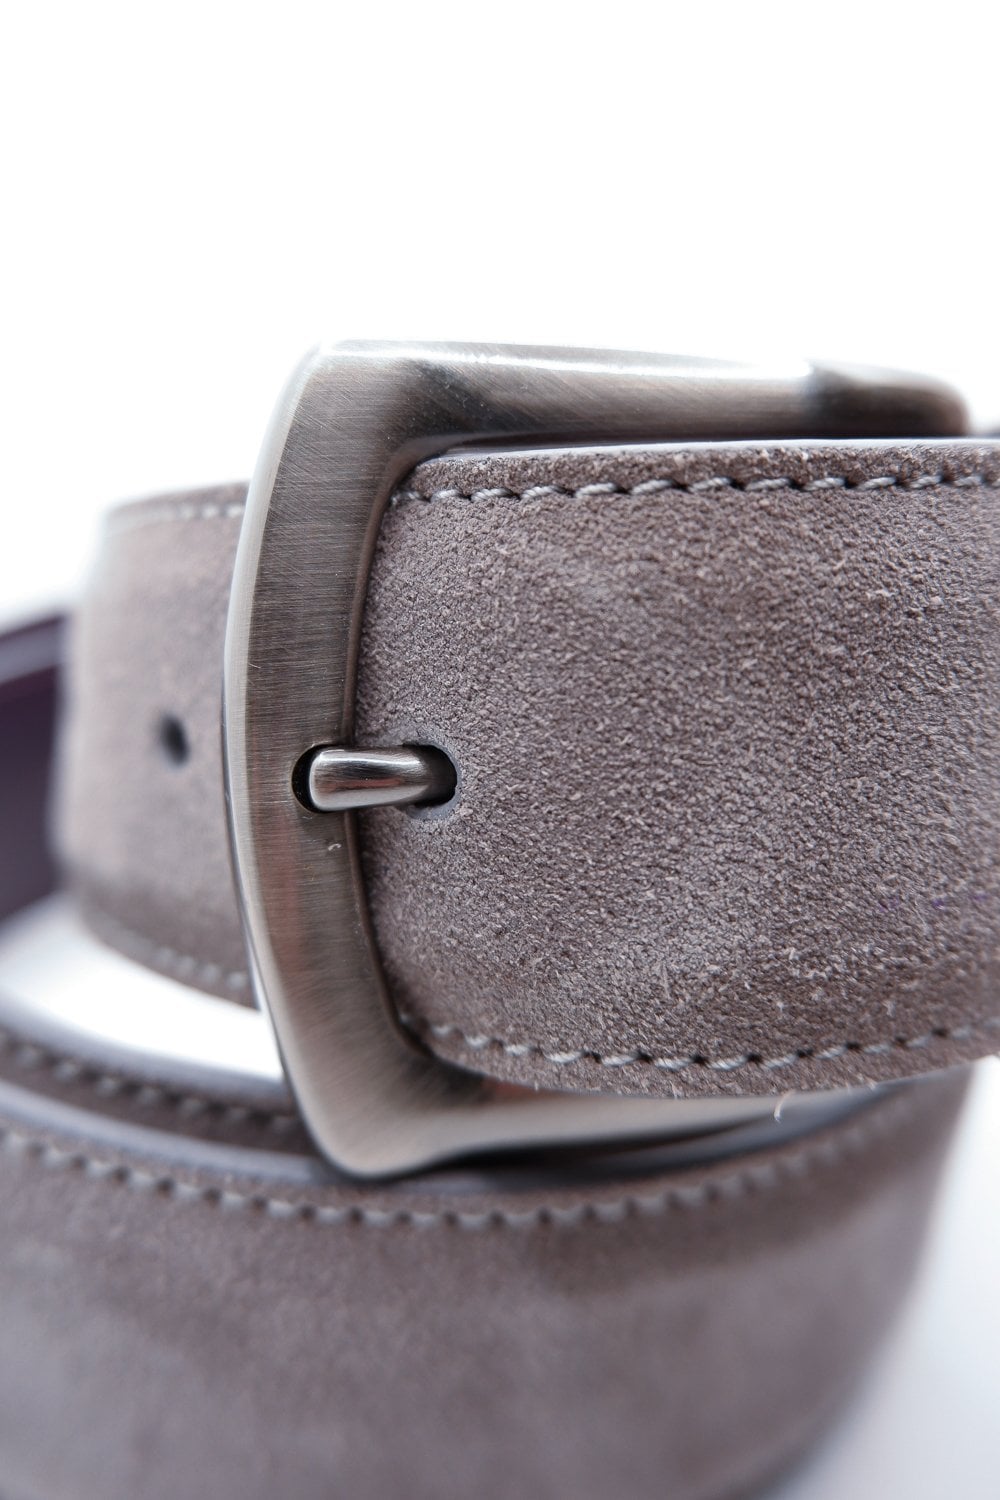 Buy the Elliot Rhodes Sinarta Suede Belt in Grey at Intro. Spend £50 for free UK delivery. Official stockists. We ship worldwide.